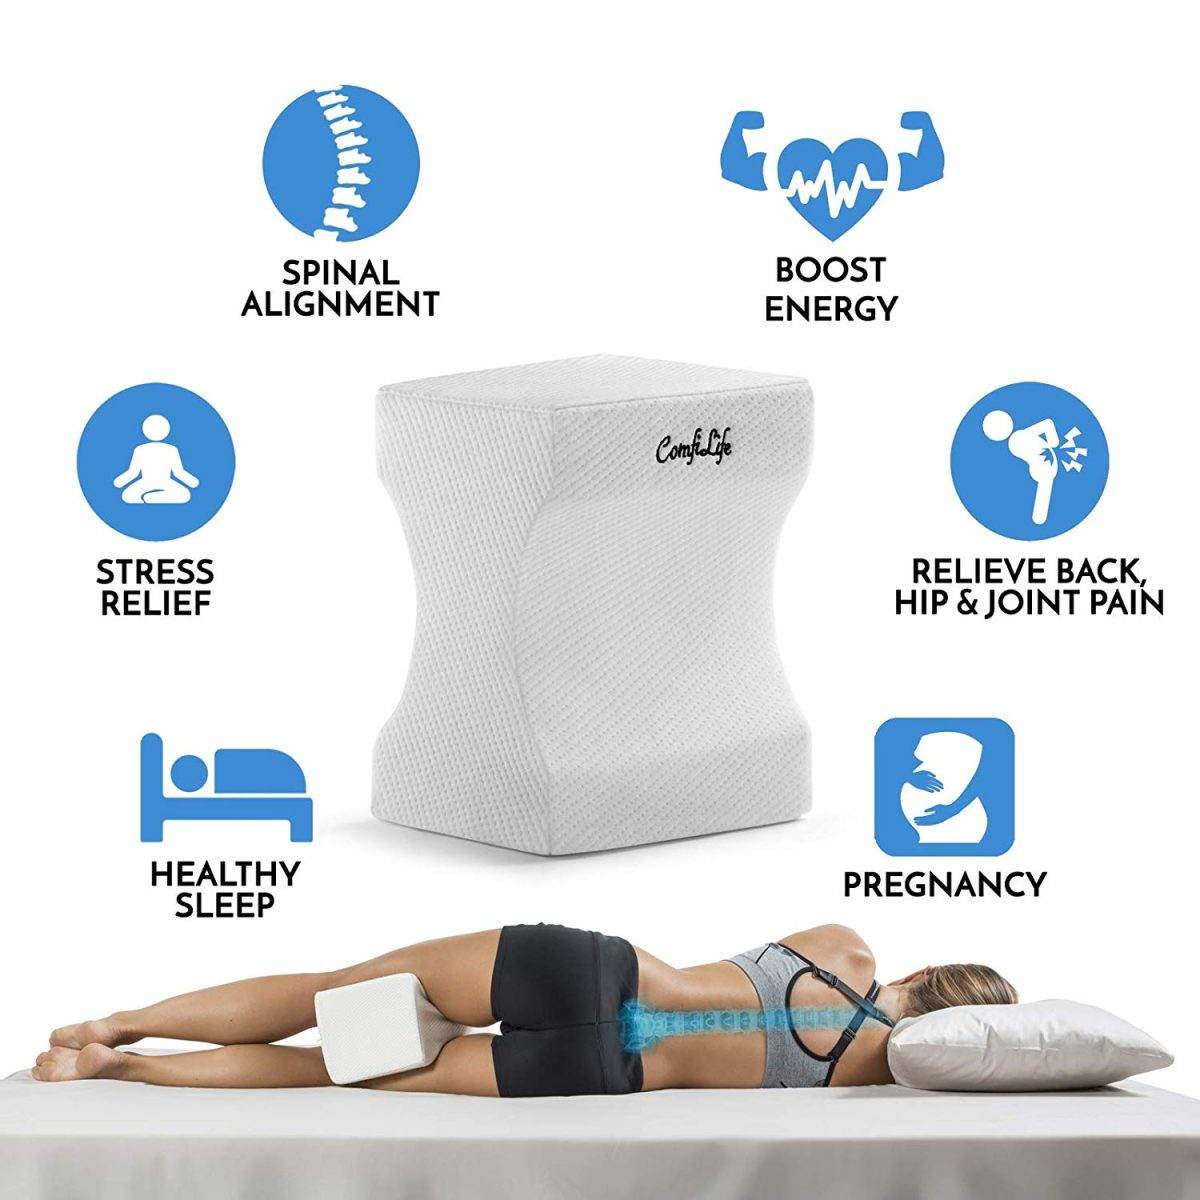 Father's Day Gift Guide: Best for Knee Pain- ComfiLife Orthopedic Memory Foam Knee Pillow